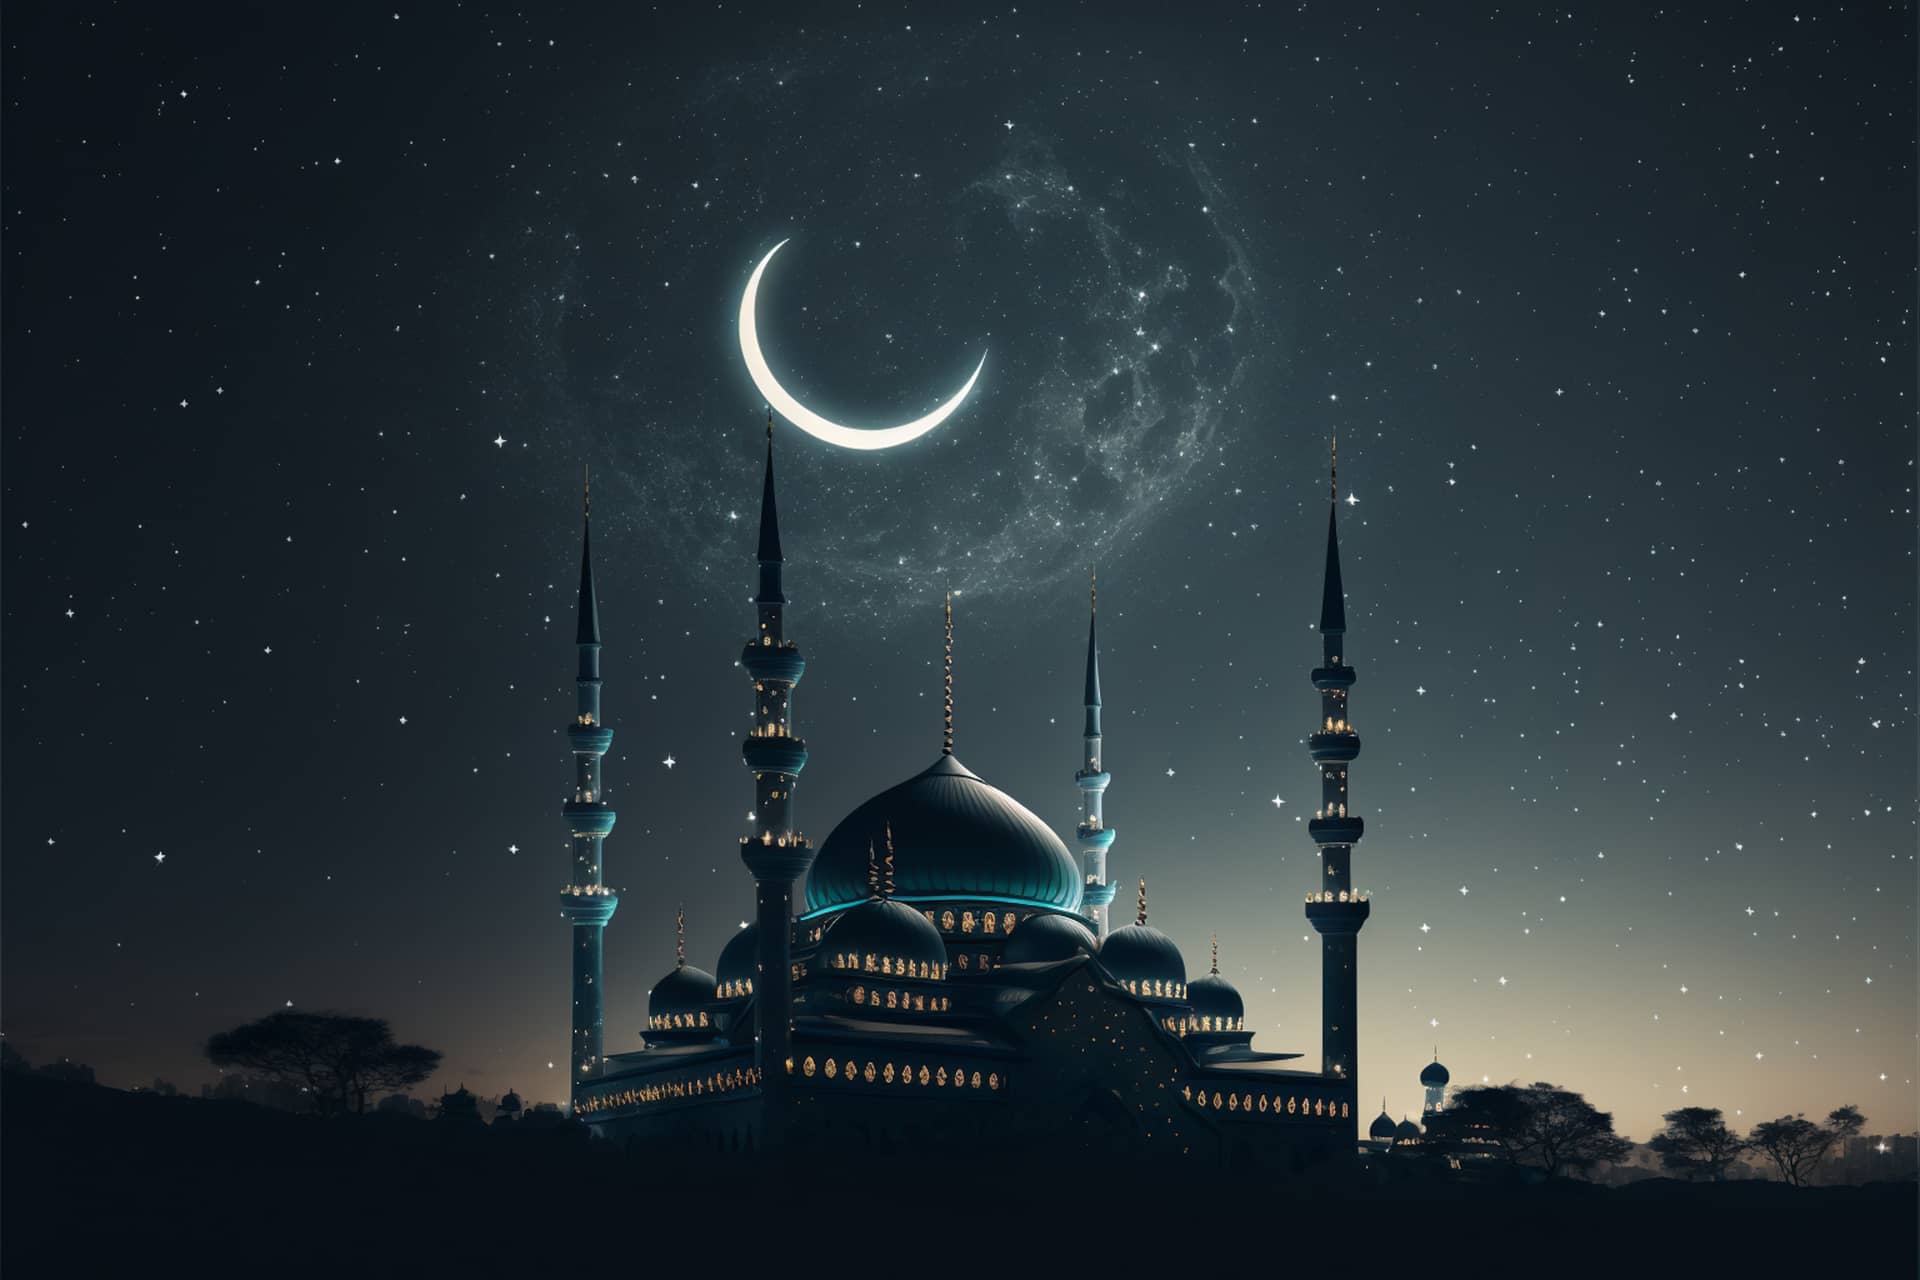 Shaped mosque silhouette night sky with crescent moon star image